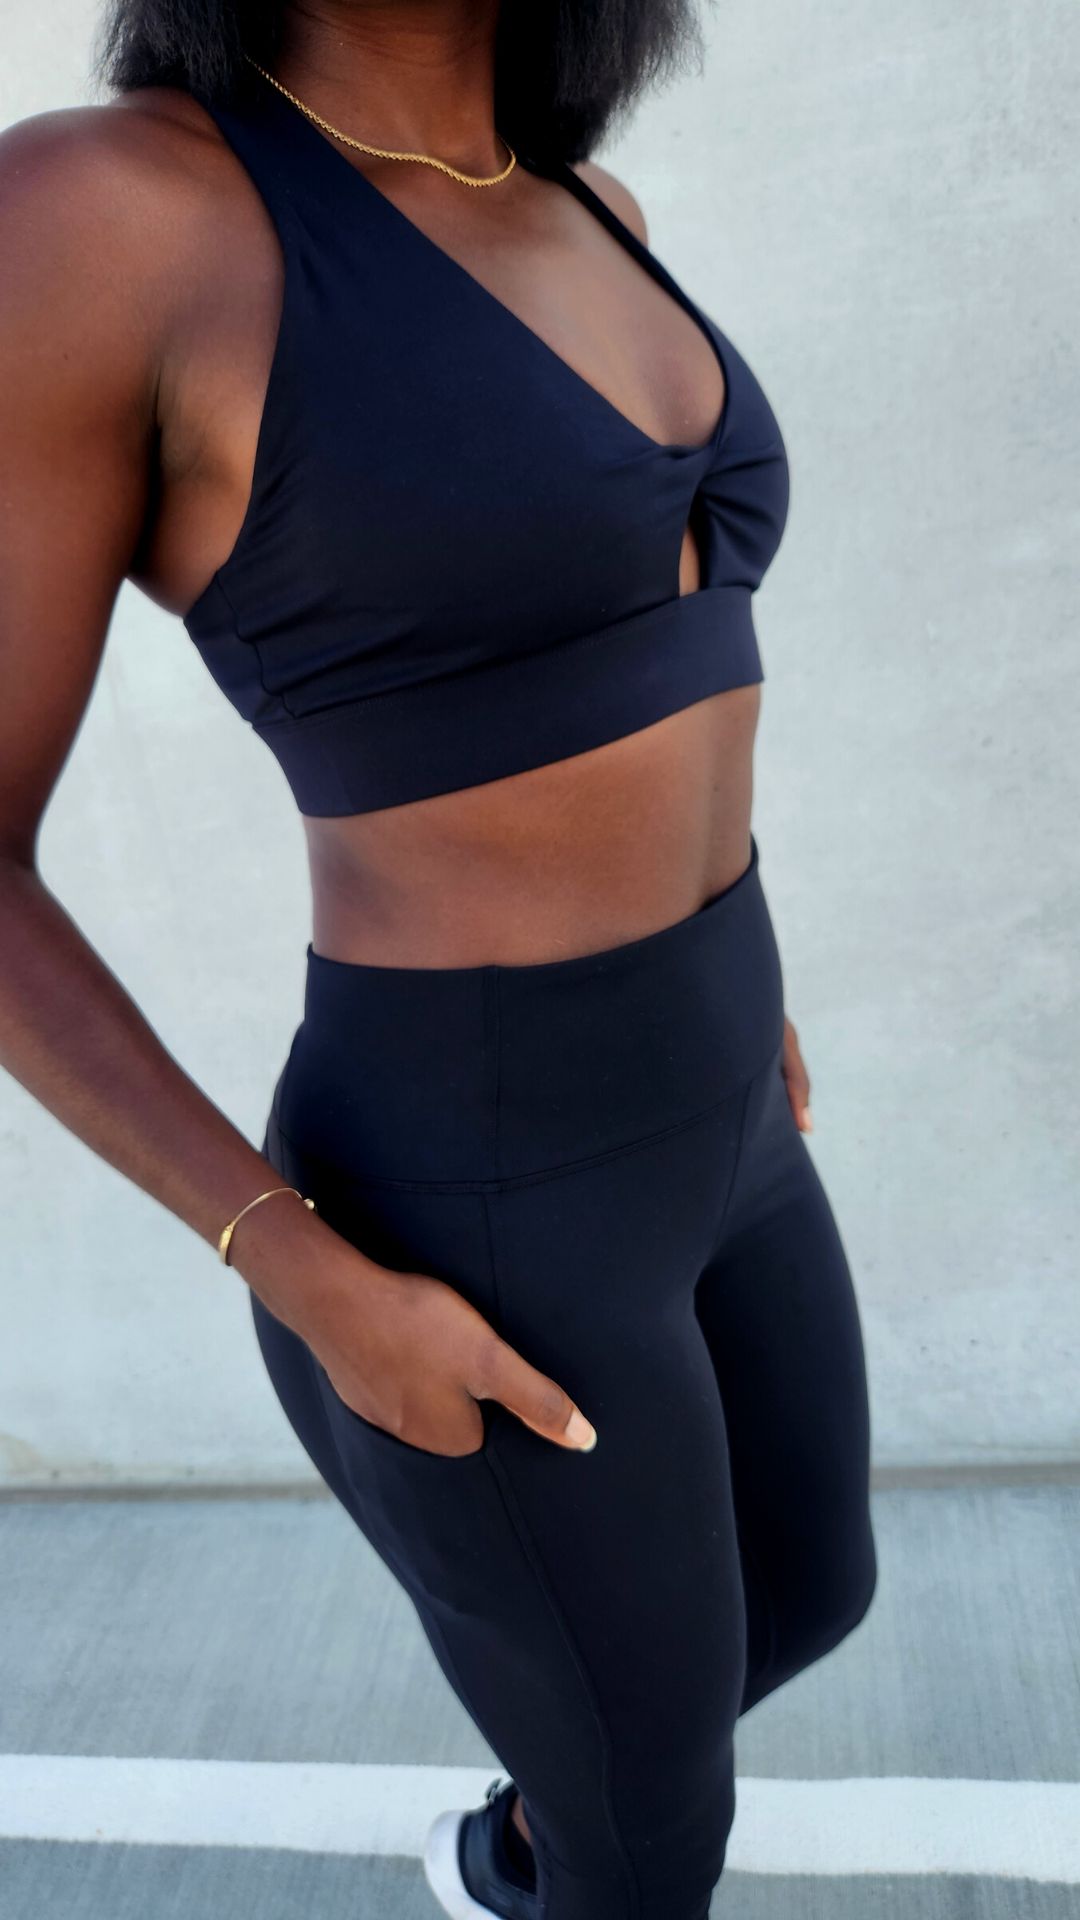 Fabletics leggings on sale for $24, buy one get one free 